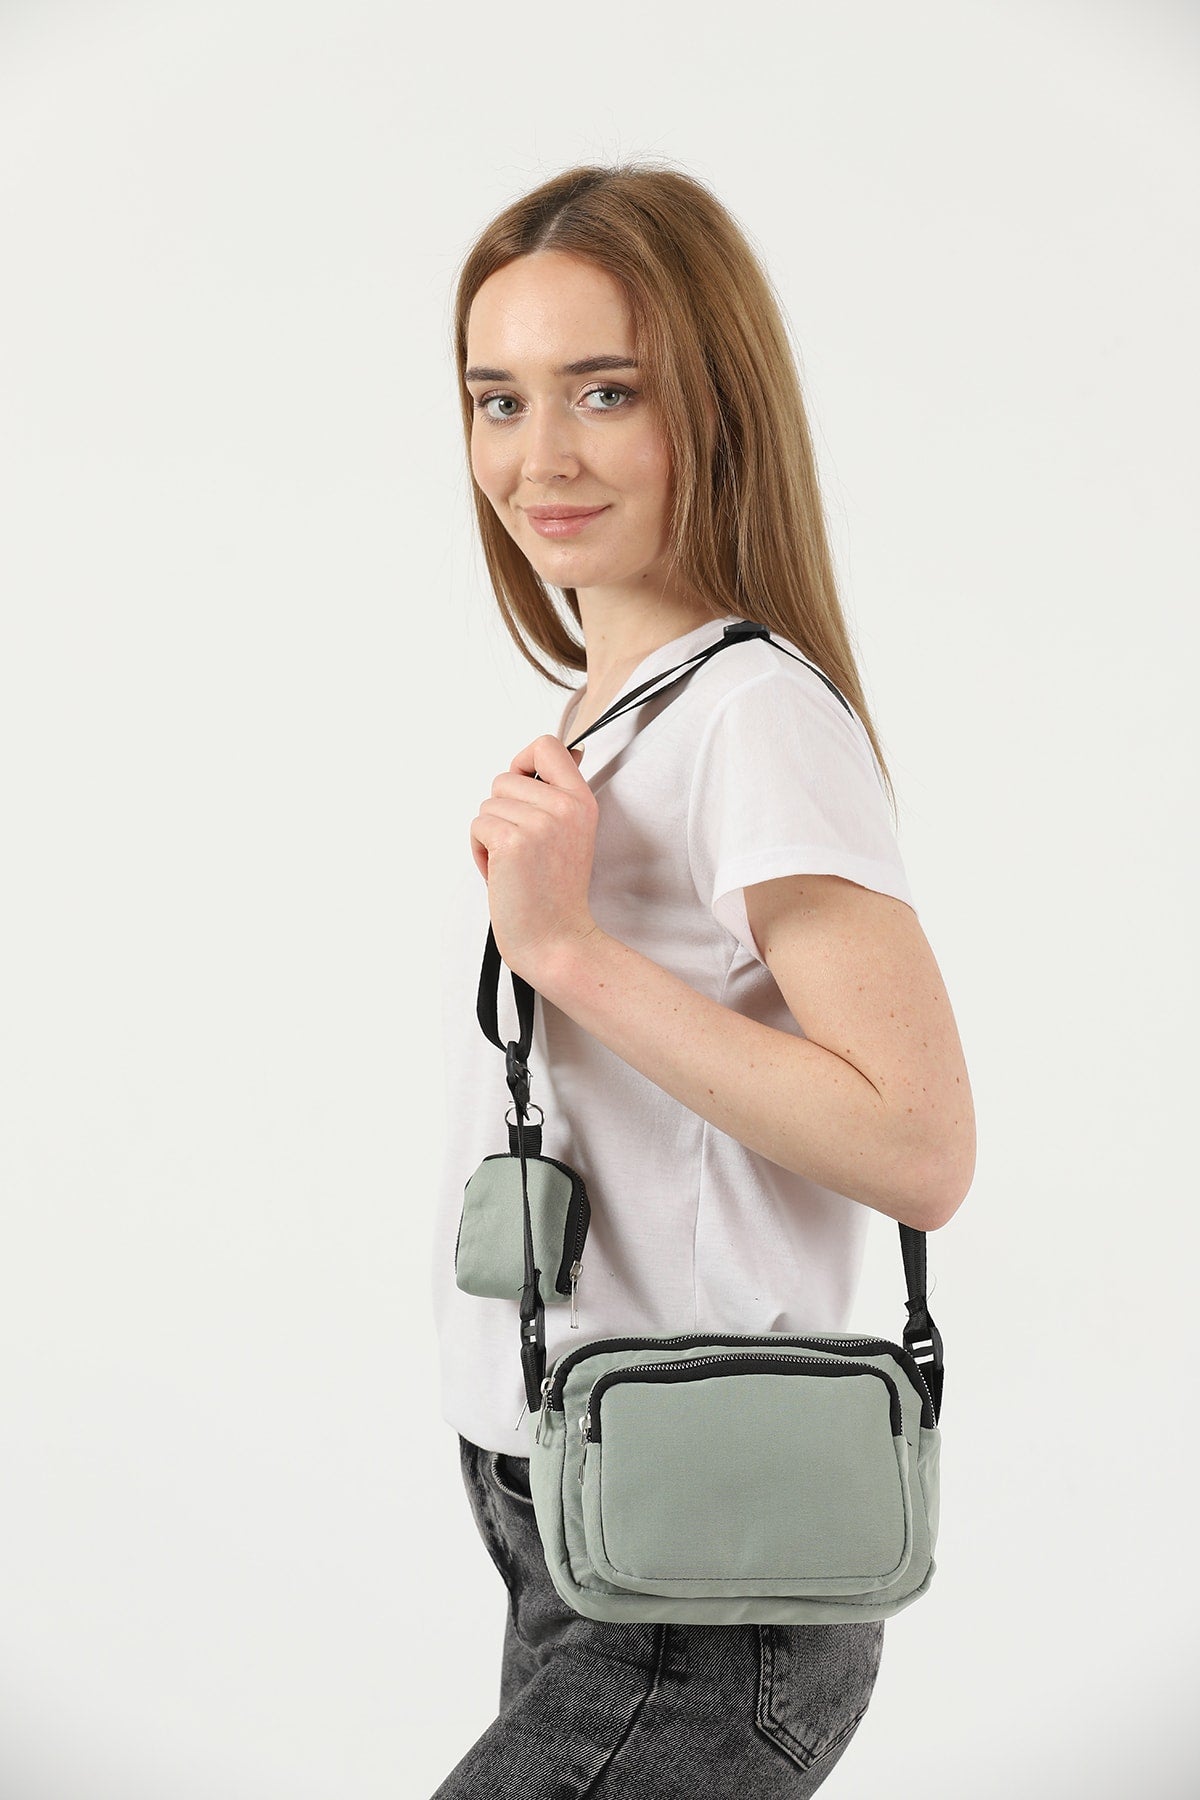 Green U4 Canvas Women's Cross Shoulder Bag With 2 Compartments And Wallet With Adjustable Strap B:17 E:22 G:12